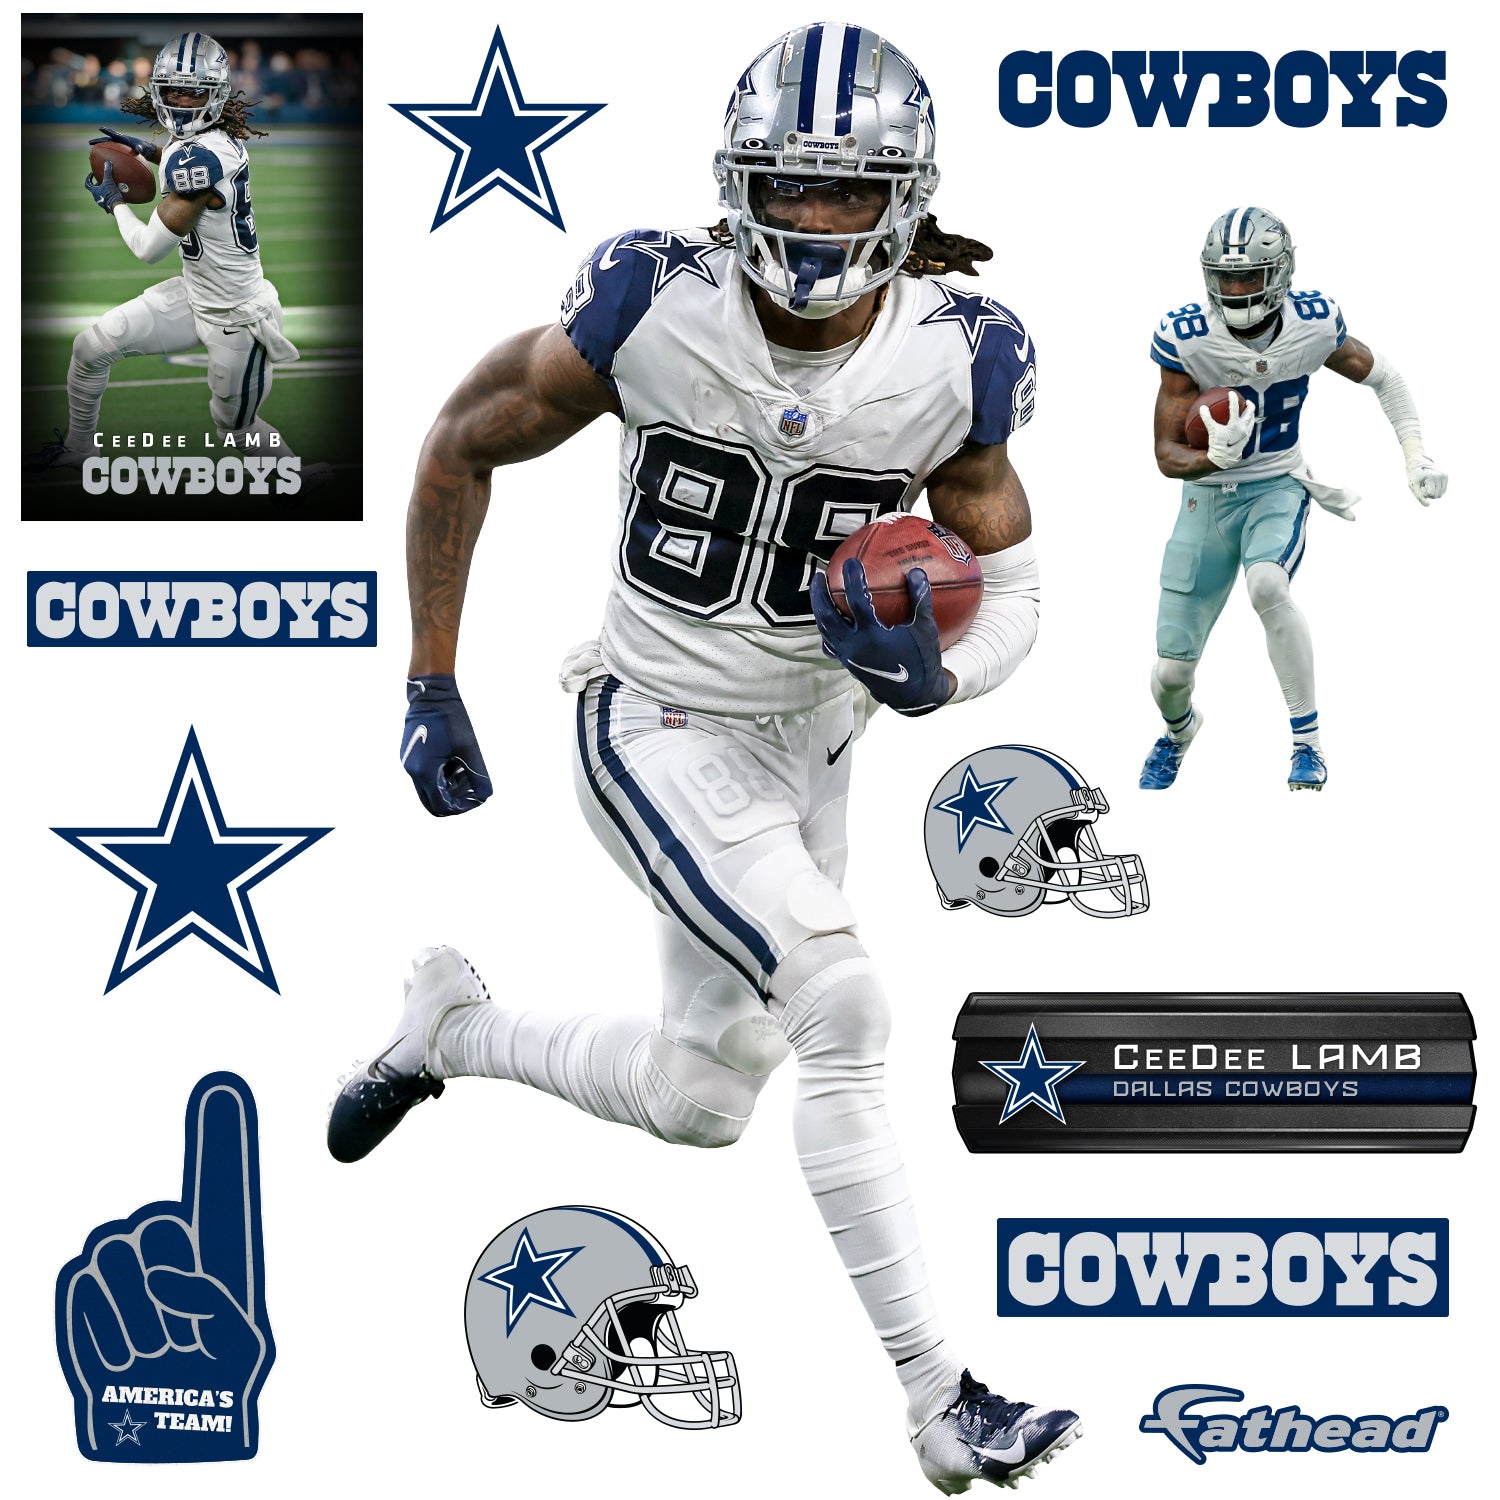 Dallas Cowboys: CeeDee Lamb 2022 - NFL Removable Adhesive Wall Decal Giant Athlete +2 Wall Decals 26'W x 51'H